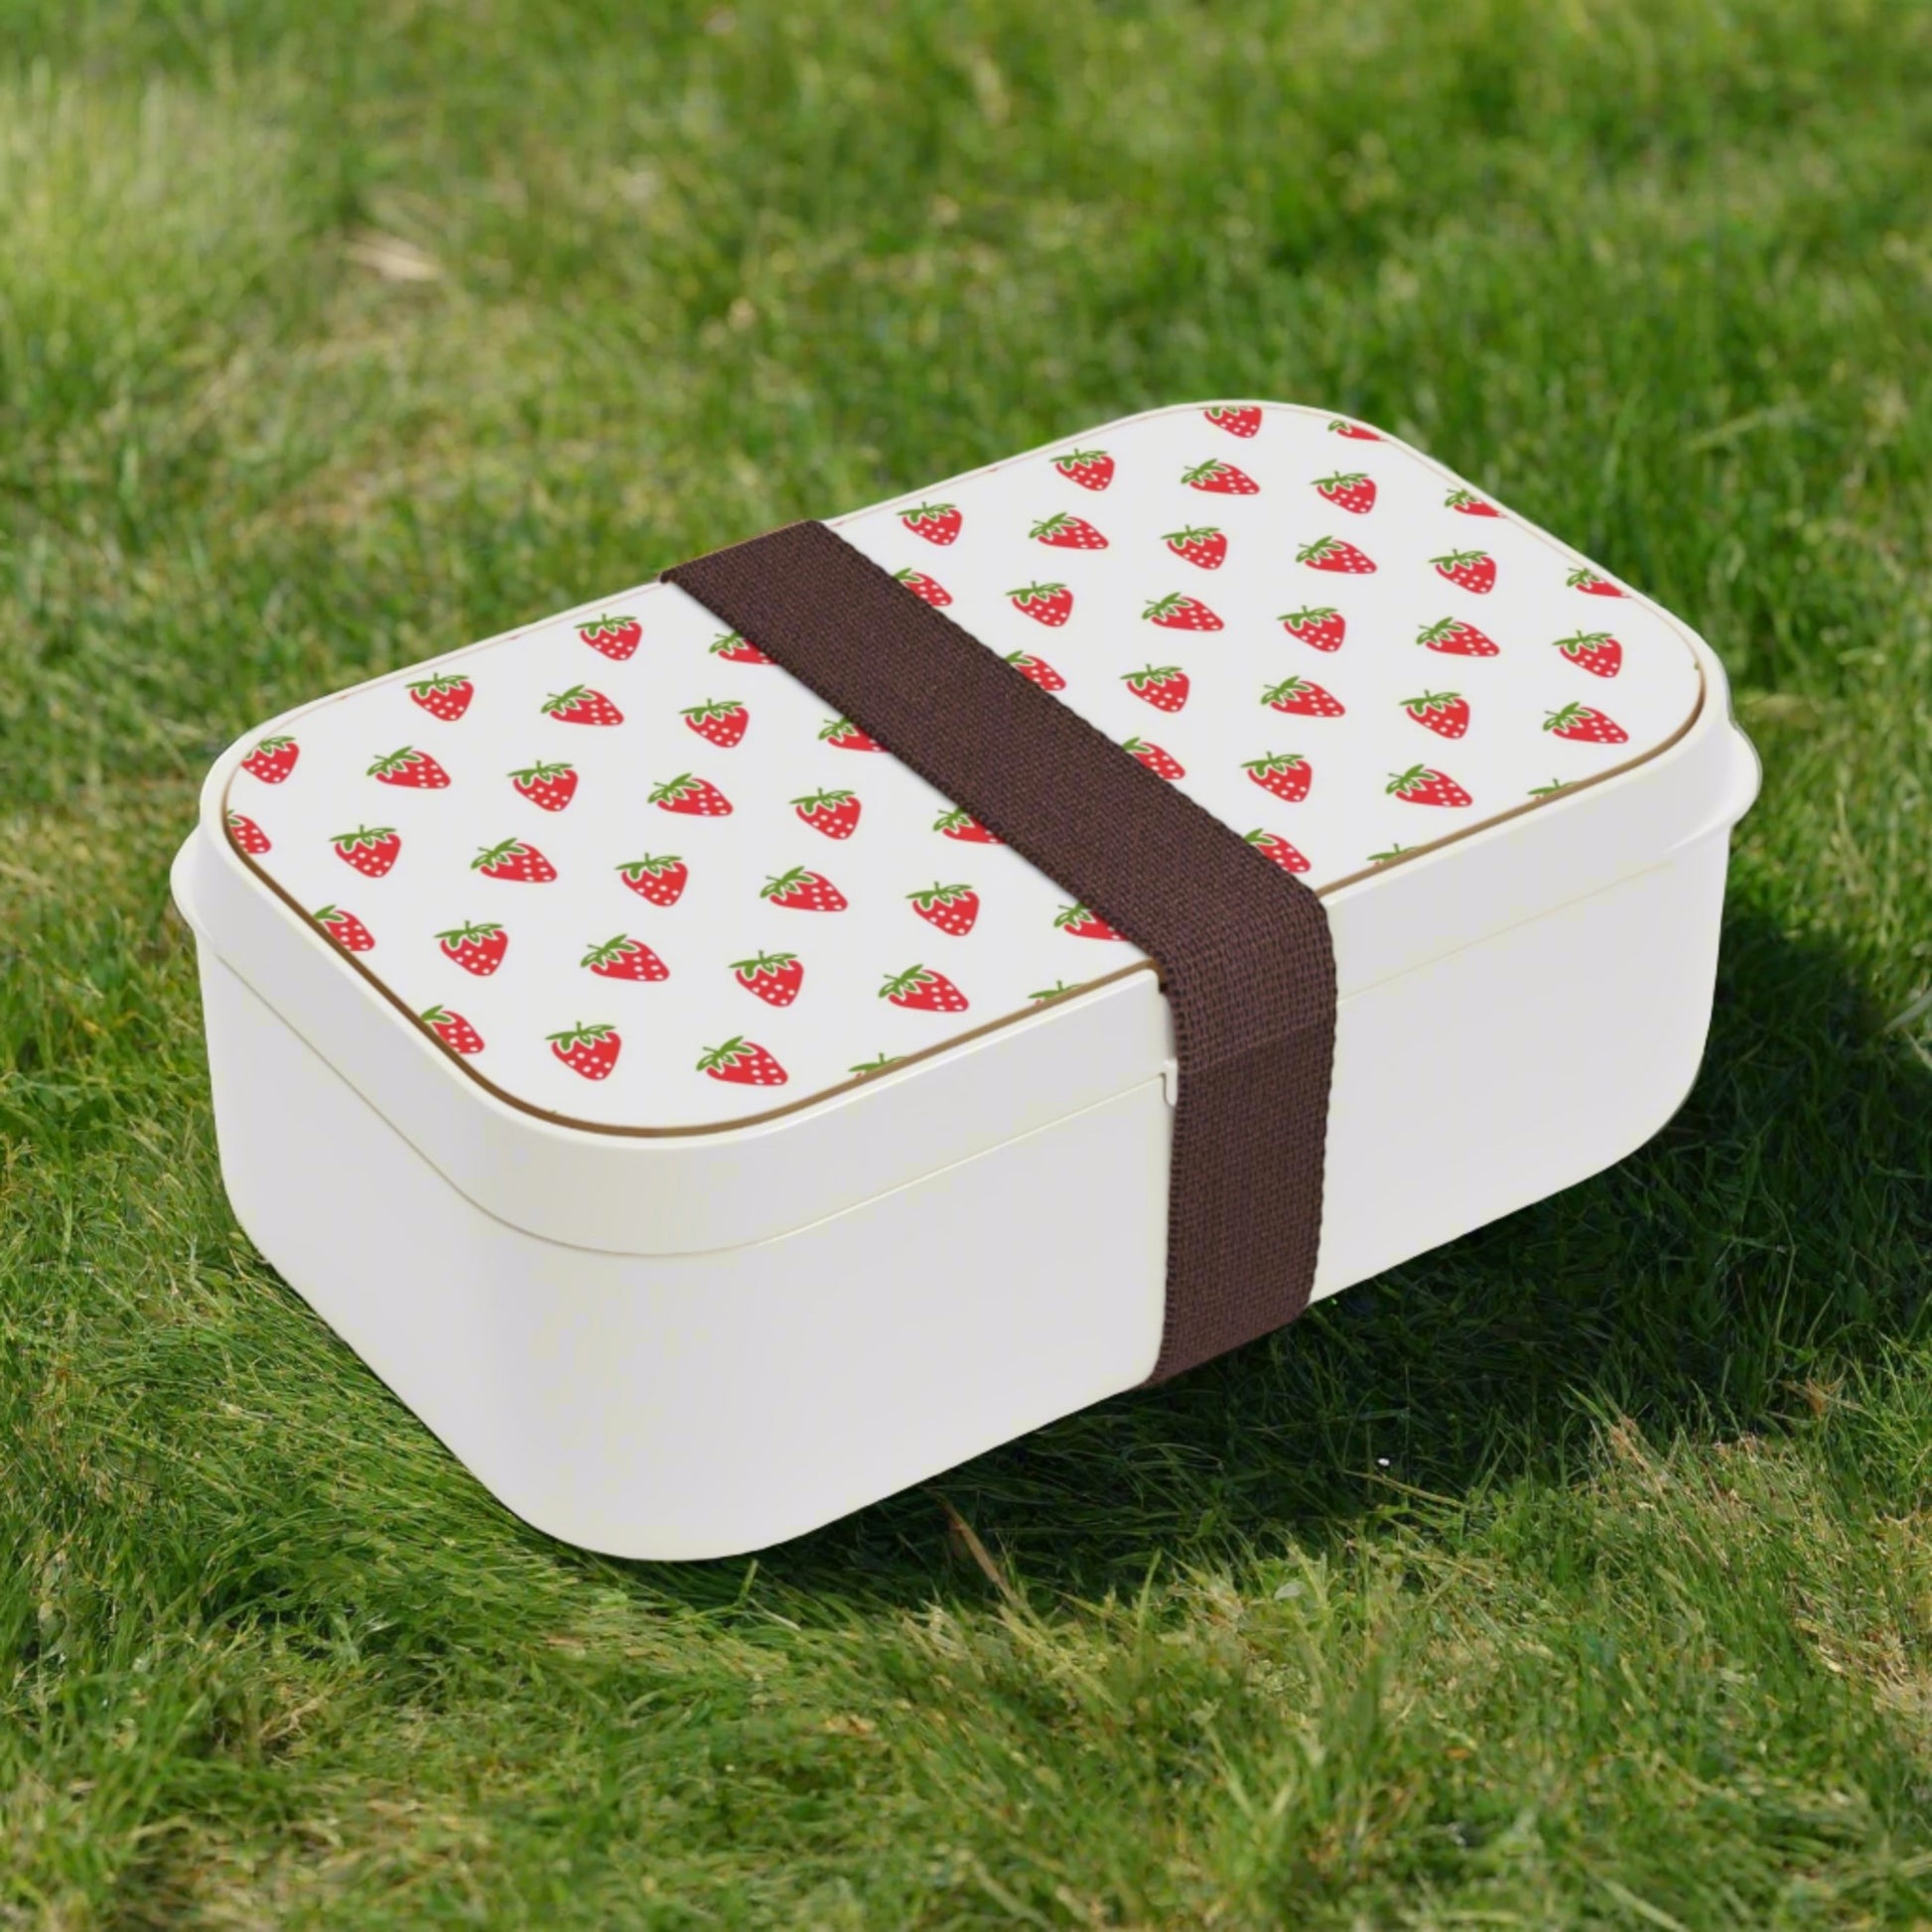 Adorable Strawberry Pattern Bento Box with Cutlery - Cottage Garden Decor